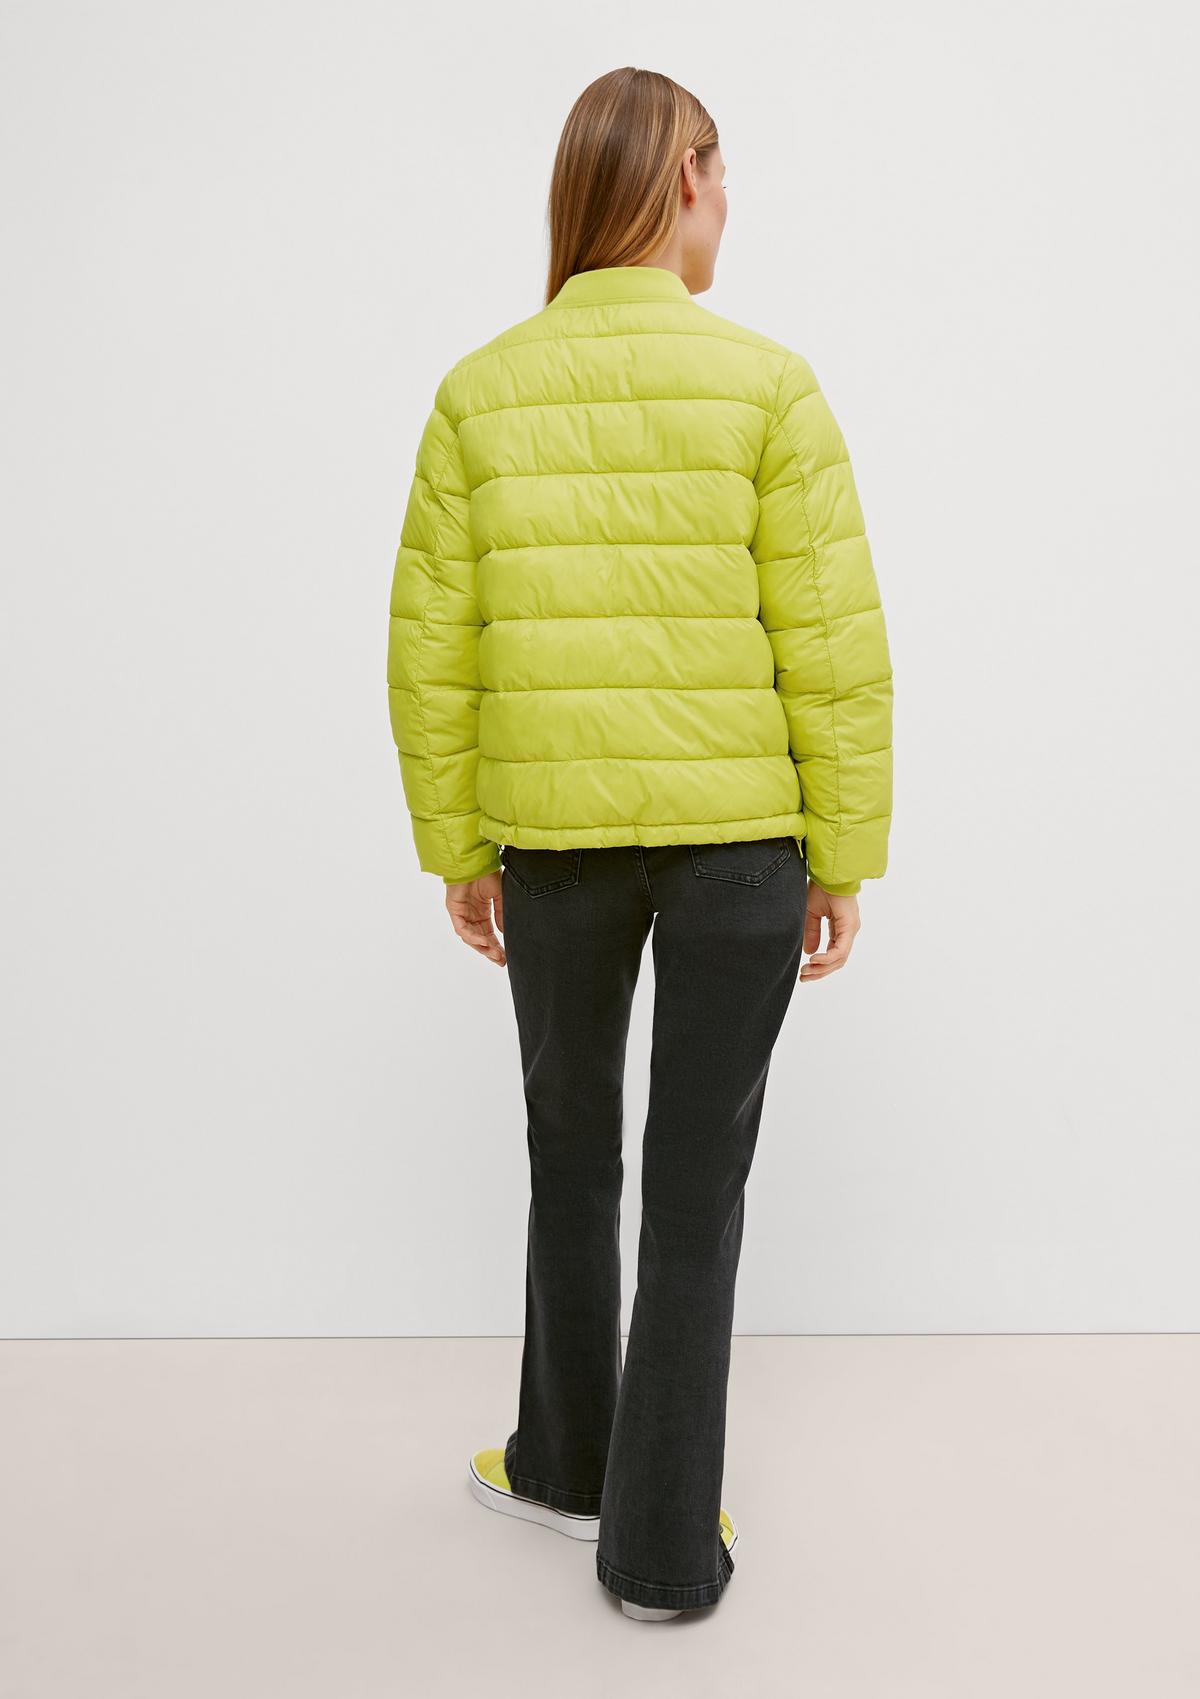 comma Quilted jacket in a boxy fit